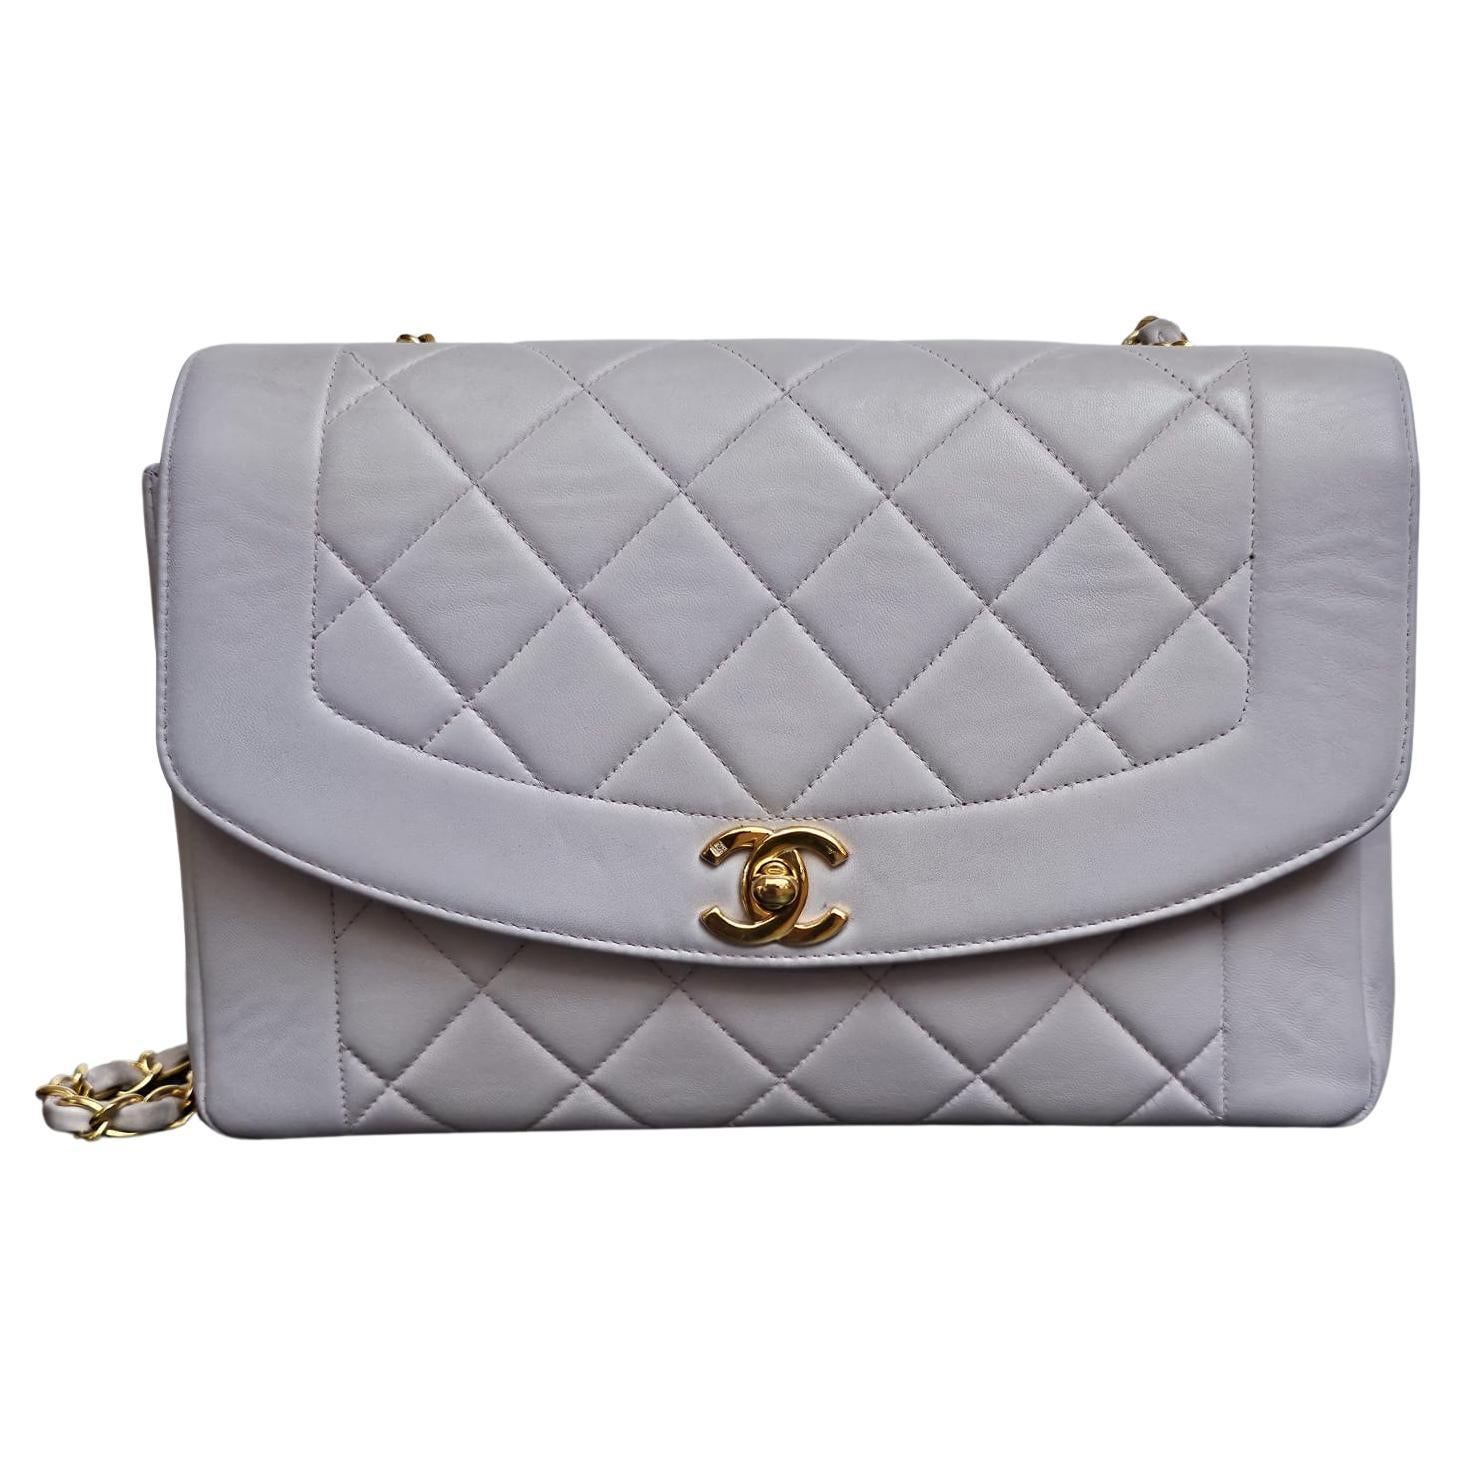 Rare Vintage Chanel Medium Lilac Lambskin Quilted Diana Flap Bag